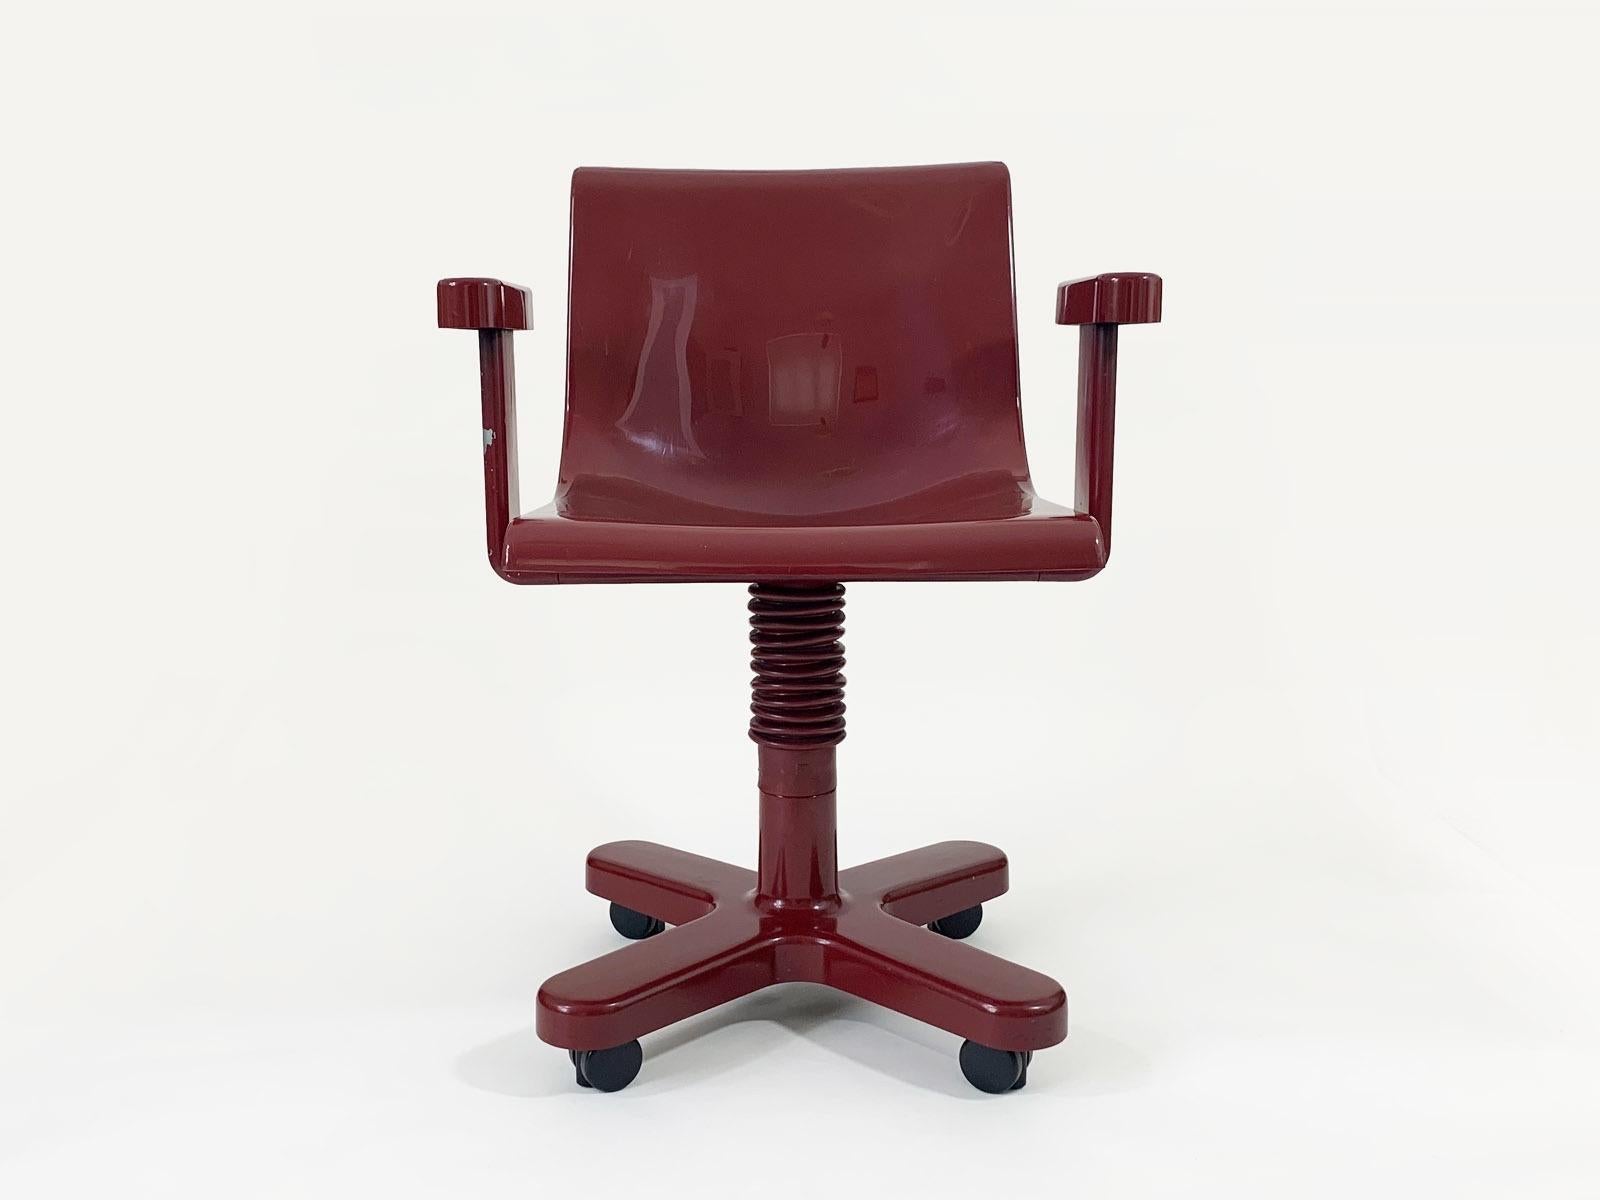 Post-Modern Ettore Sottsass Synthesis Desk Chair, Olivetti, Italy, 1973 For Sale